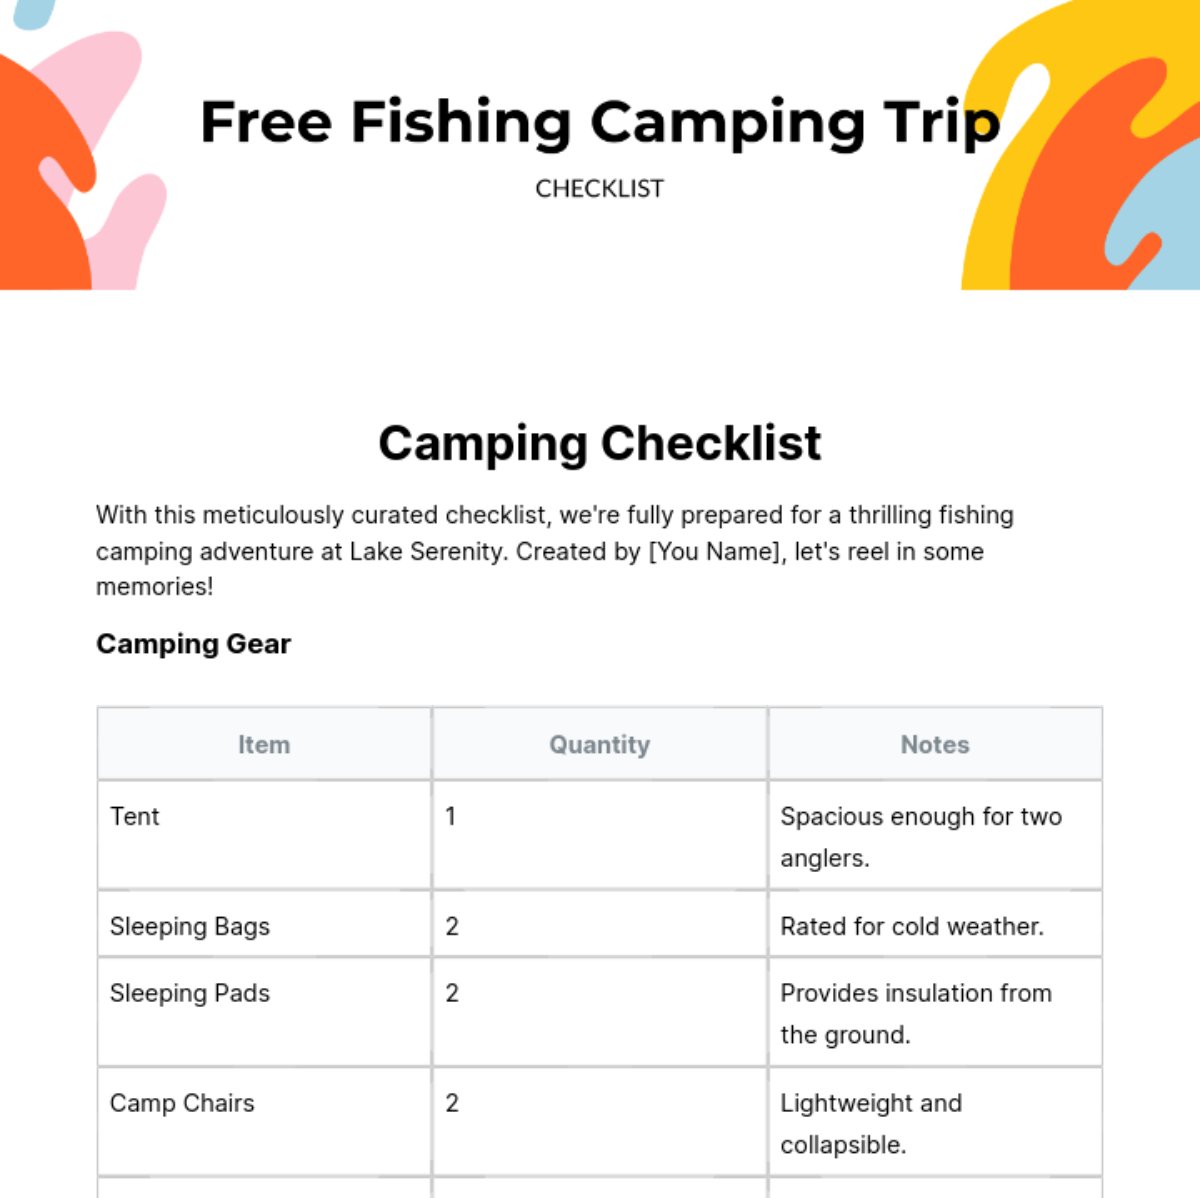 Free Fishing Camping Trip Checklist Template